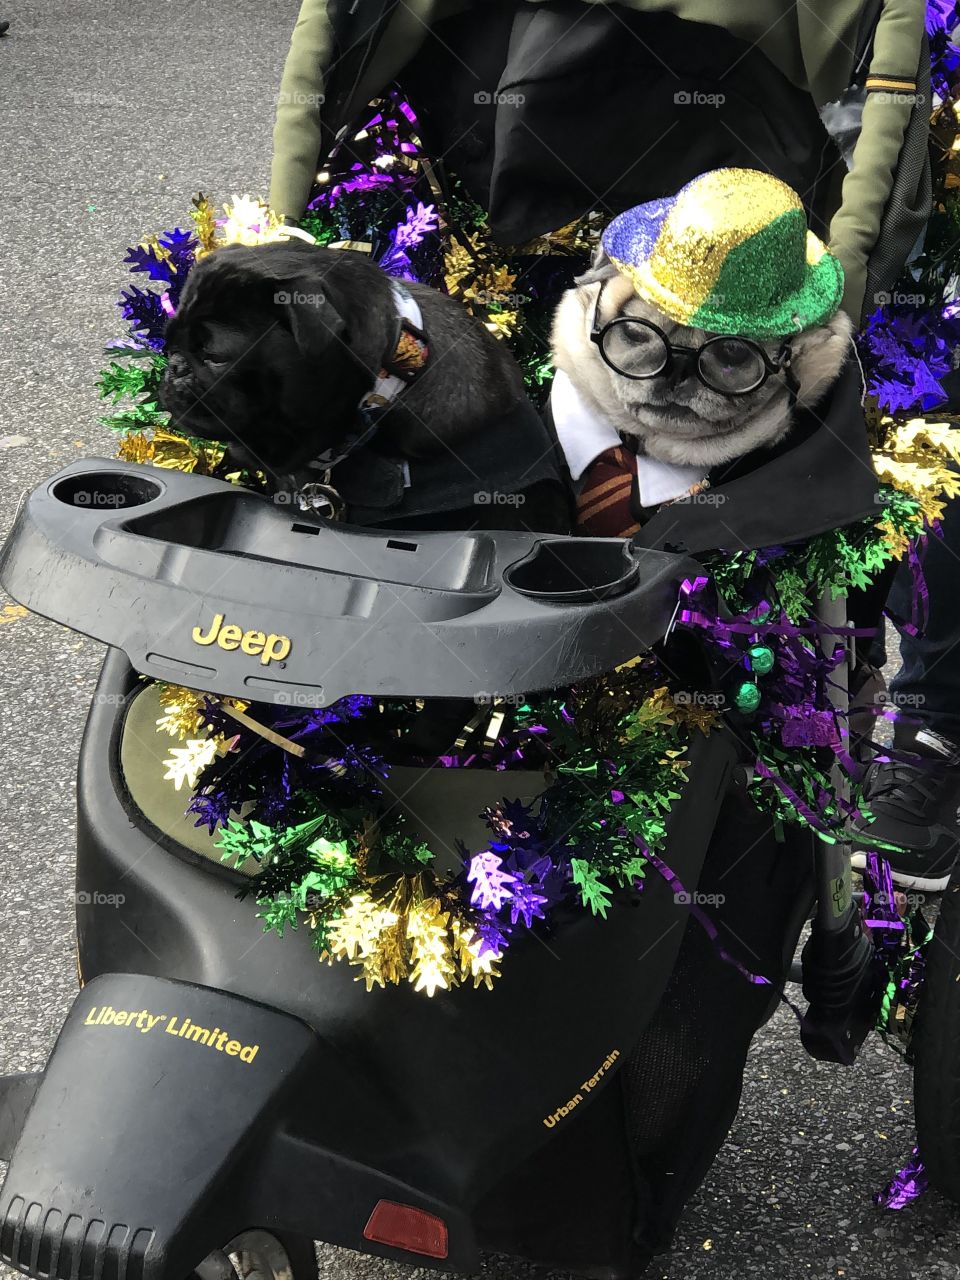 Two dog friends in stroller dressed up